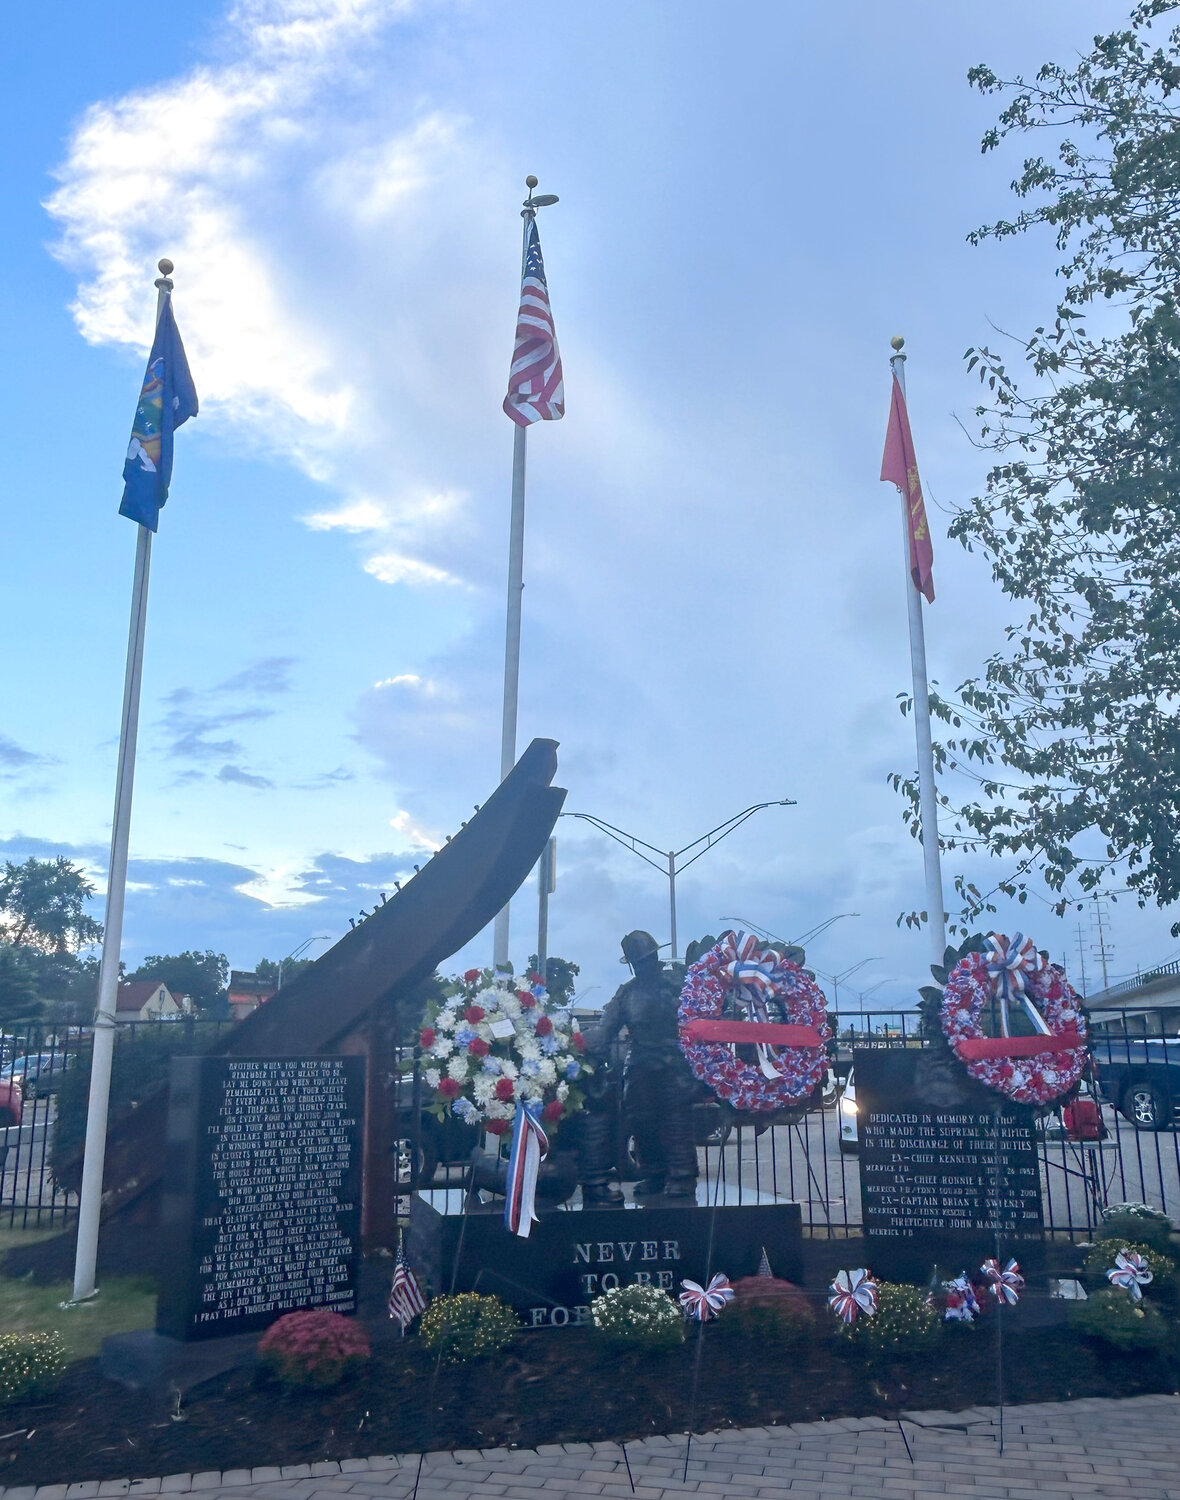 Wreathes were placed in front of the hamlet’s Sept. 11 memorial.